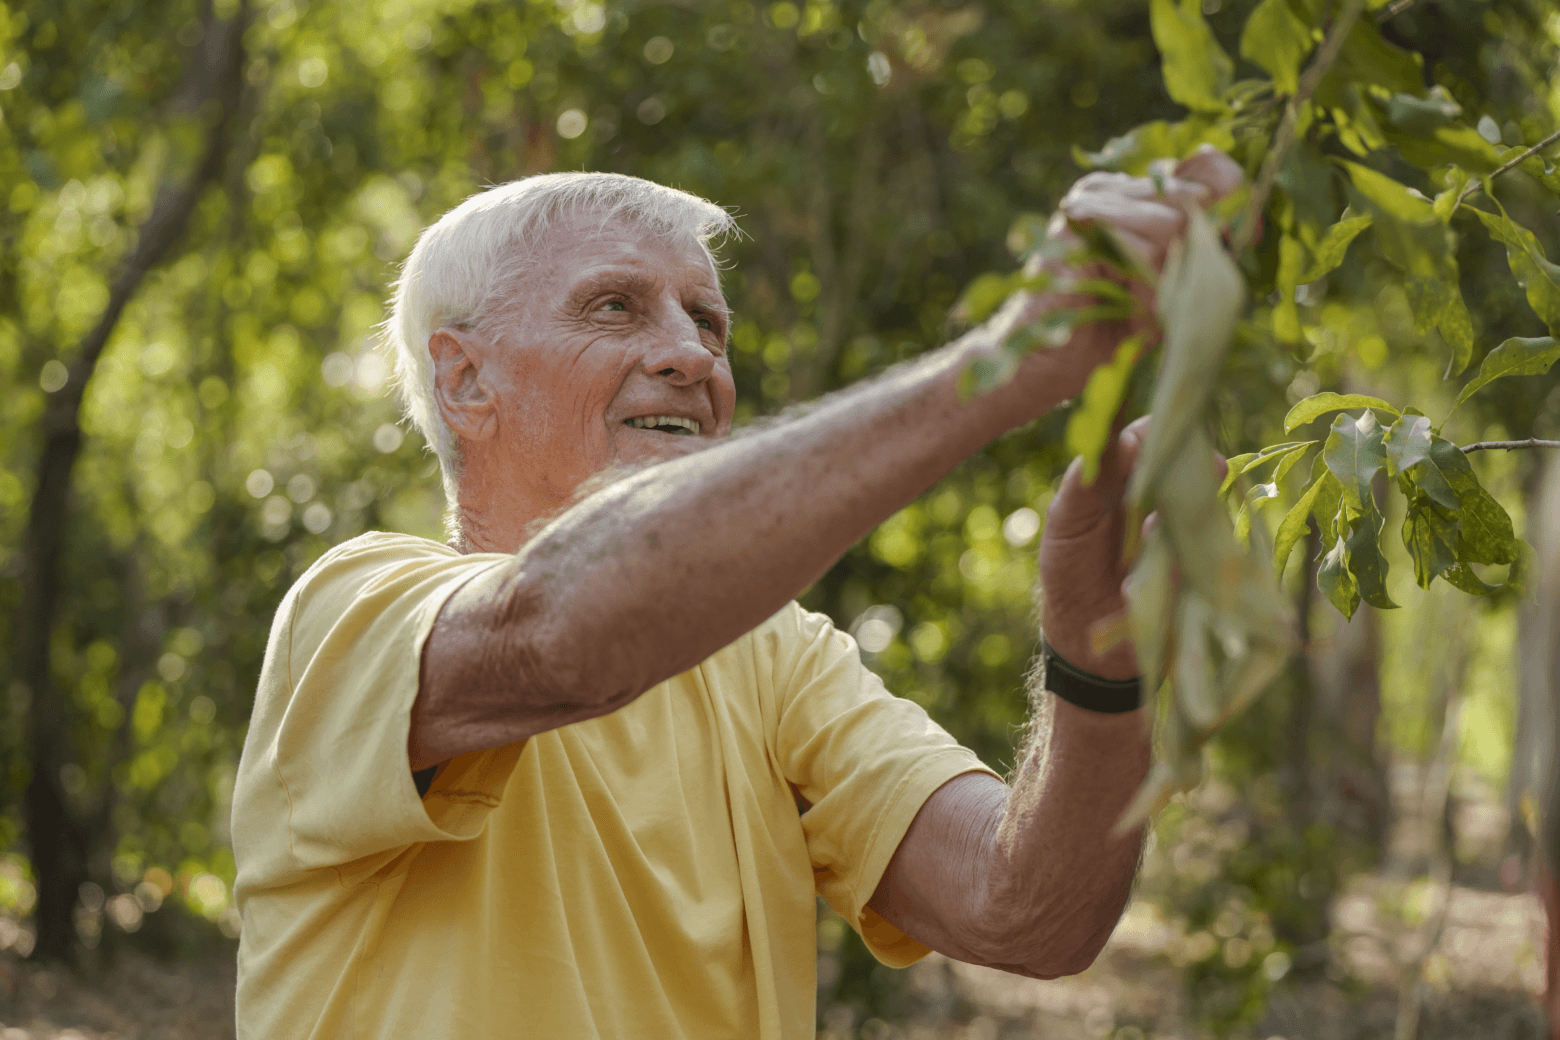 A man wearing a yellow t-shirt picking some leaves off a tree